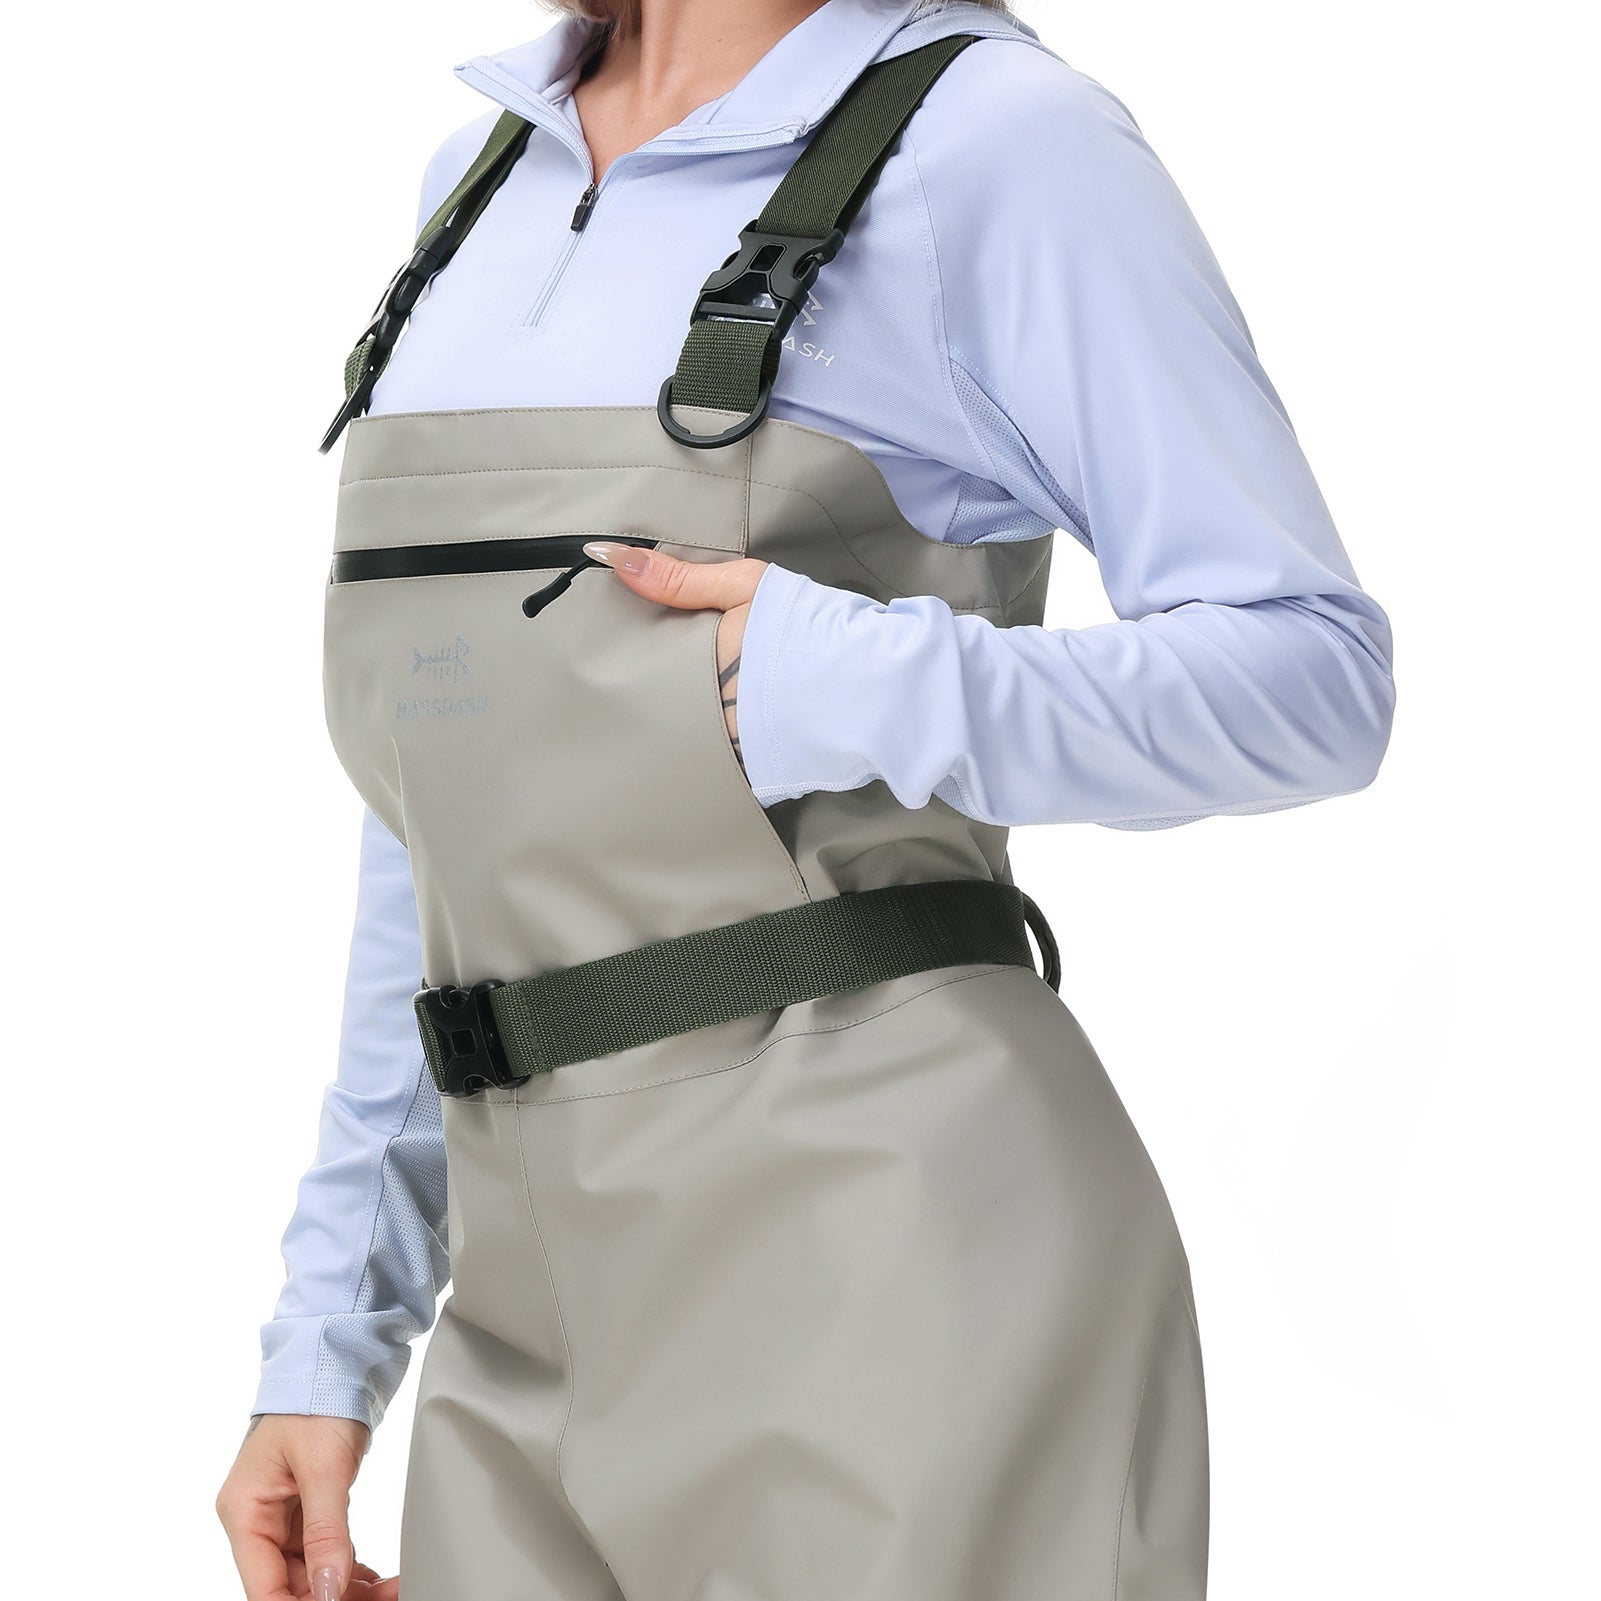 Bulk Buy China Wholesale Women Plus Size Chest Waders Stocking Foot Fishing  Waders $7 from Ningbo Clover Textile Co. Ltd